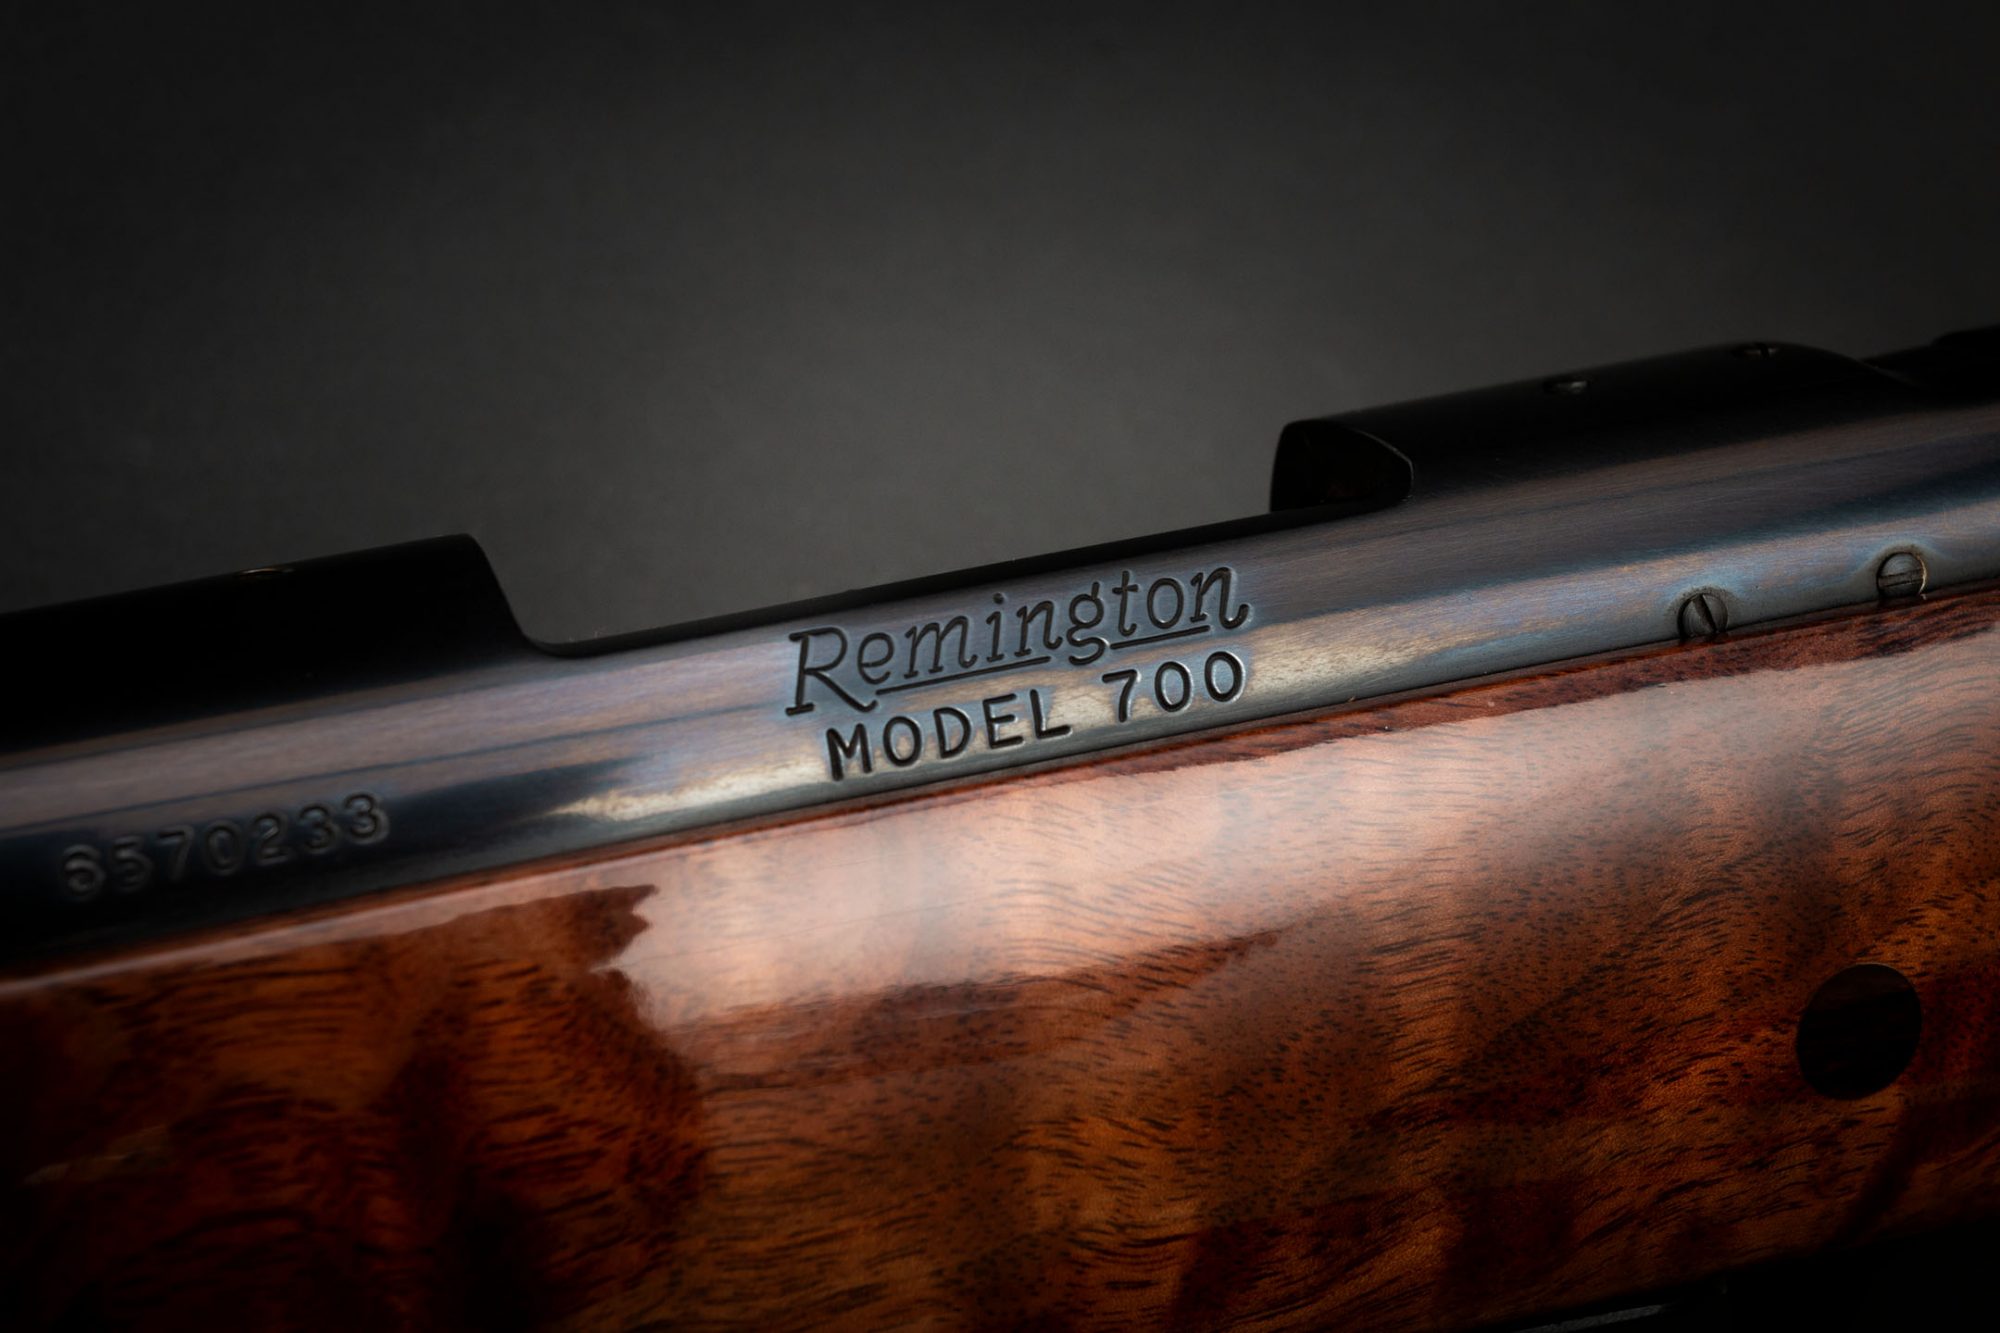 Remington Model 700 Grade C, for sale by Turnbull Restoration Co. of Bloomfield, NY